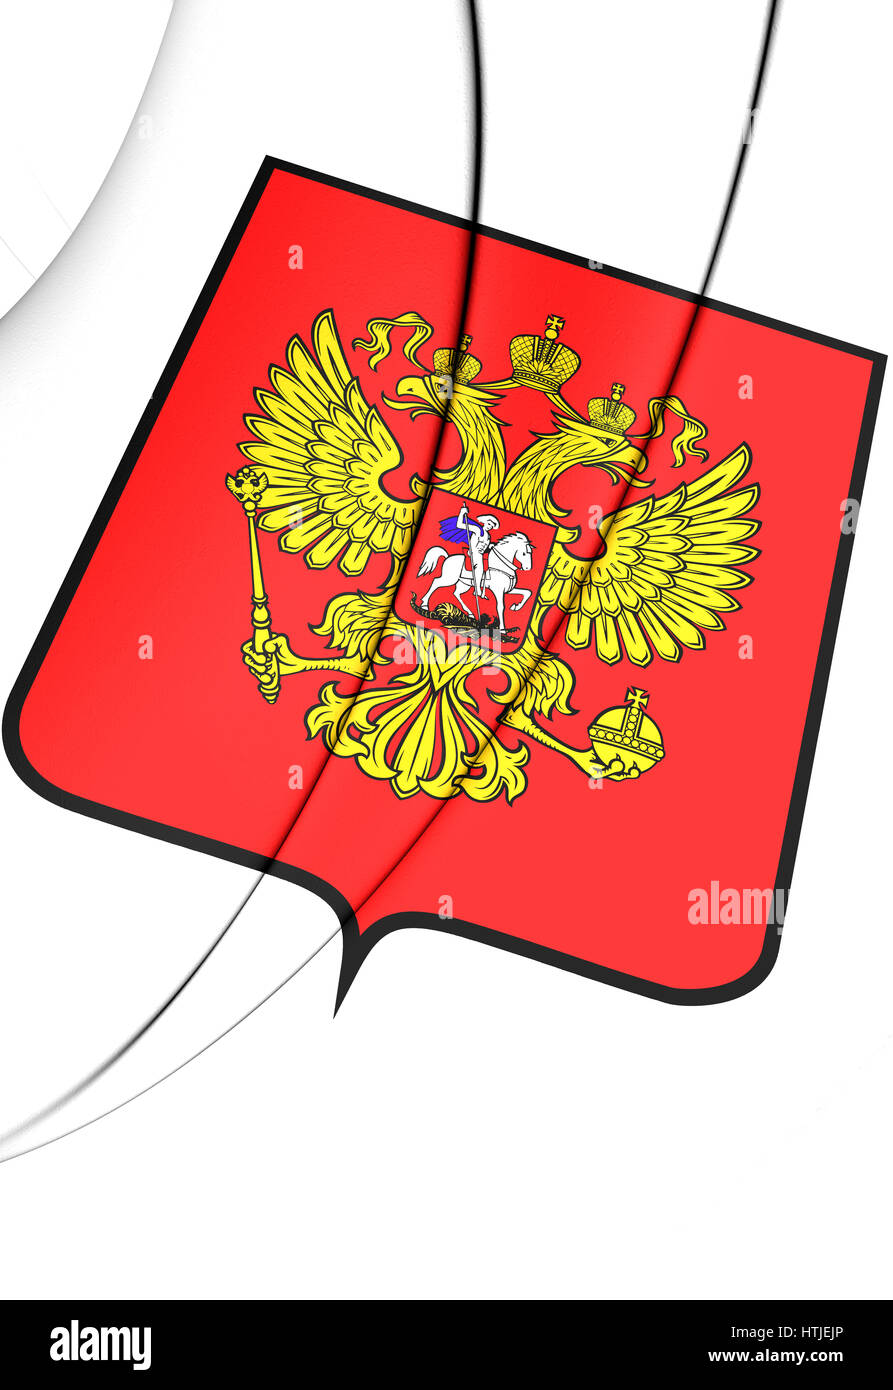 Russia Coat of Arms. 3D Illustration. Stock Photo